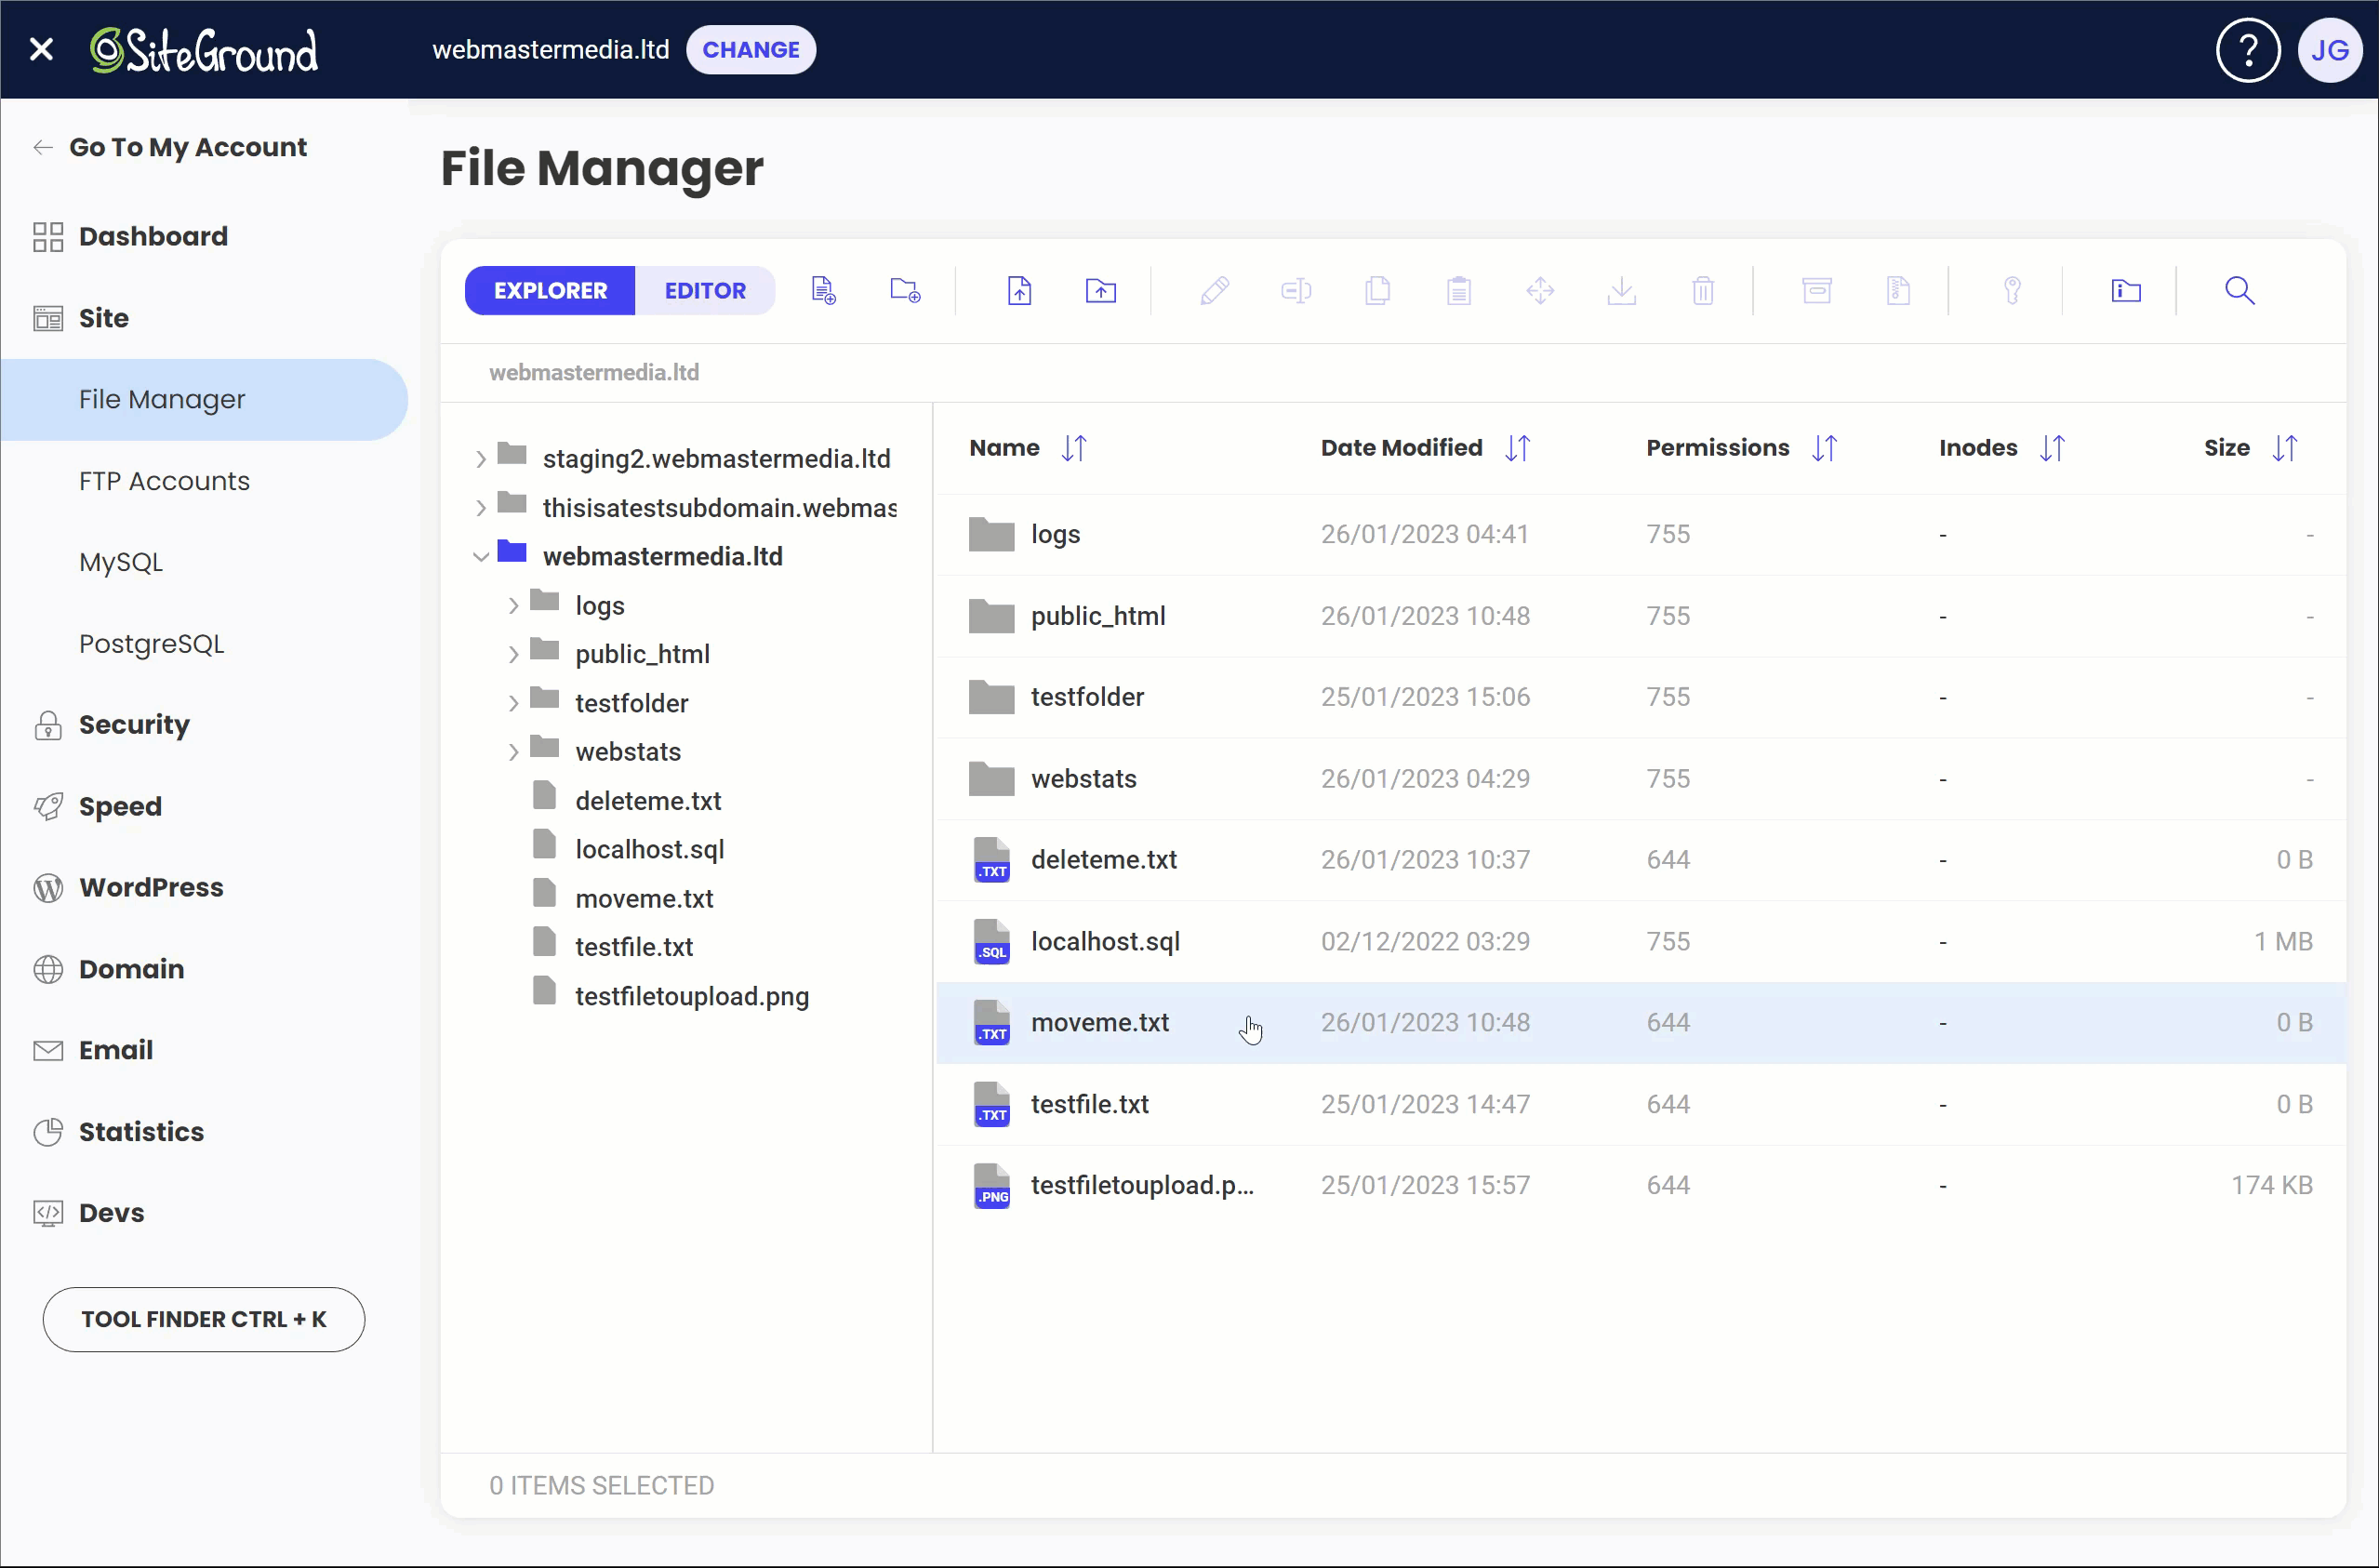 SiteGround File Manager: Move file or folder - Drag and Drop